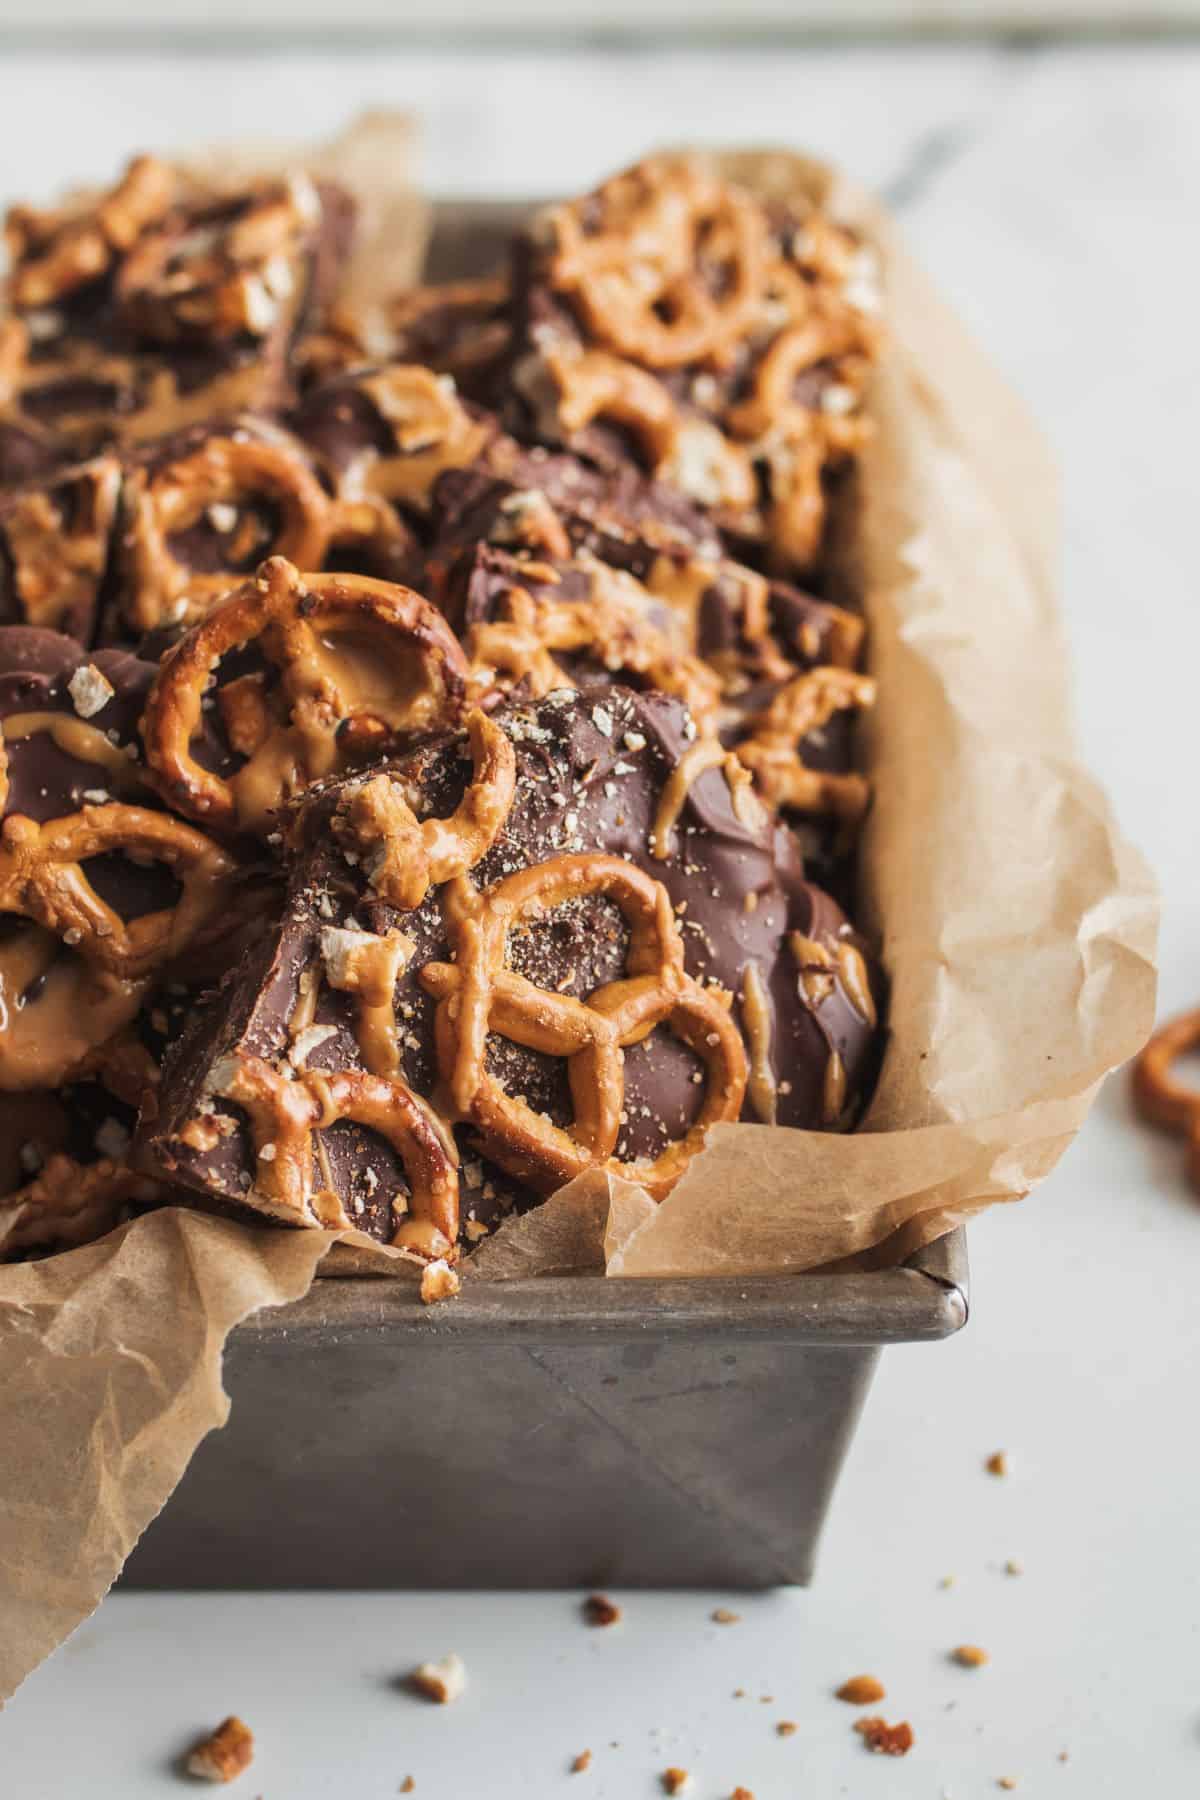 Date bark chopped and set in a parchment paper lined loaf pan, showing the texture of salt and pretzels on top of chocolaty date bark.